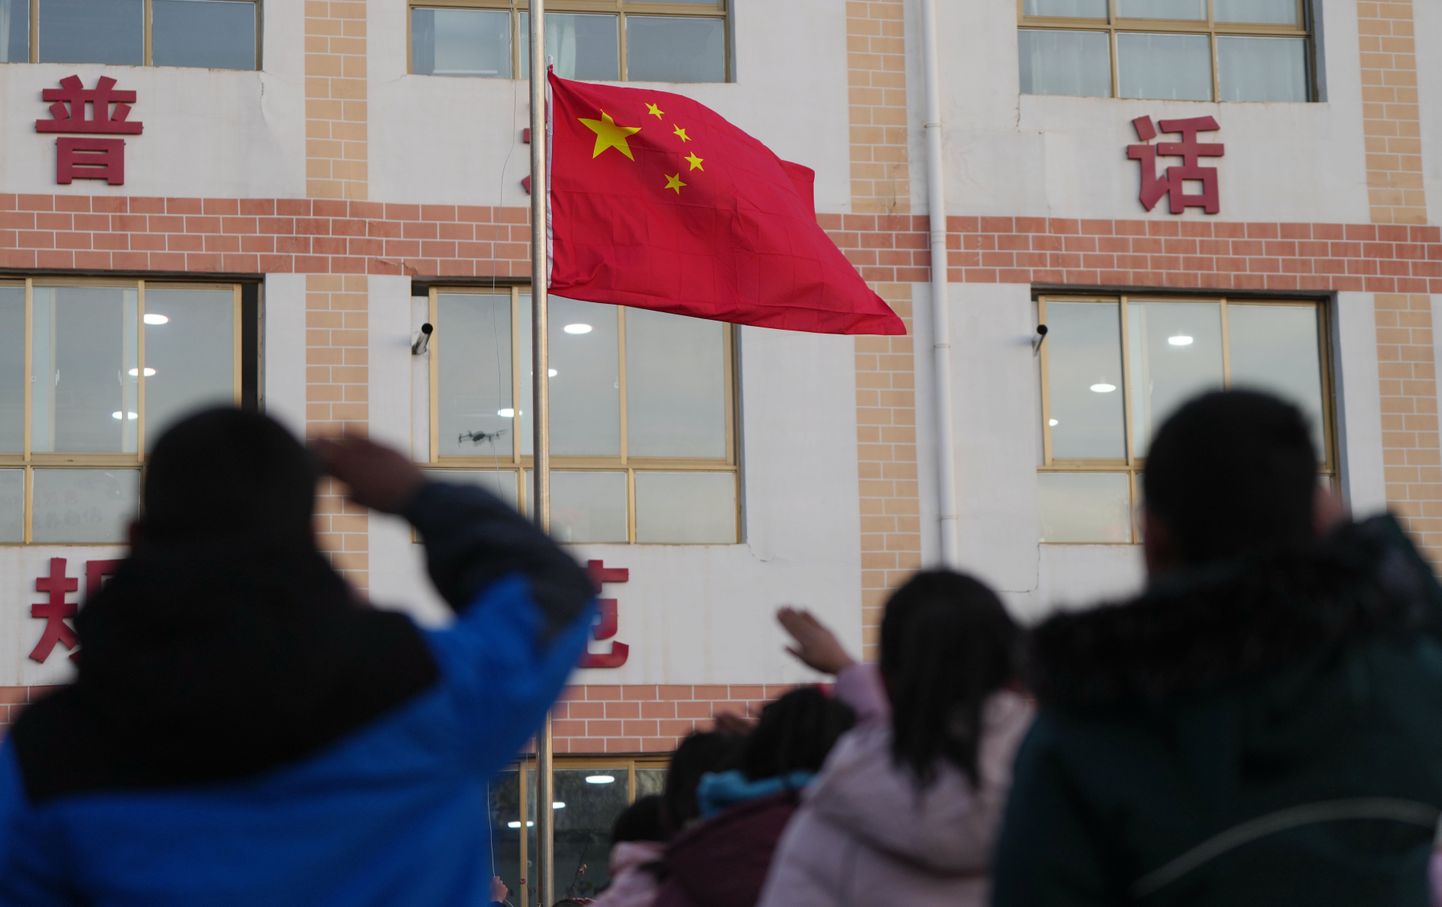 JISHISHAN, Dec. 25, 2023  A flag-raising ceremony is held at a primary school in Liugou Township of Jishishan County, northwest China's Gansu Province, Dec. 25, 2023. Primary and secondary schools in the quake-hit areas of Jishishan started to resume classes on Monday after a safety check. (Credit Image: Â© Chen Bin/Xinhua via ZUMA Press)